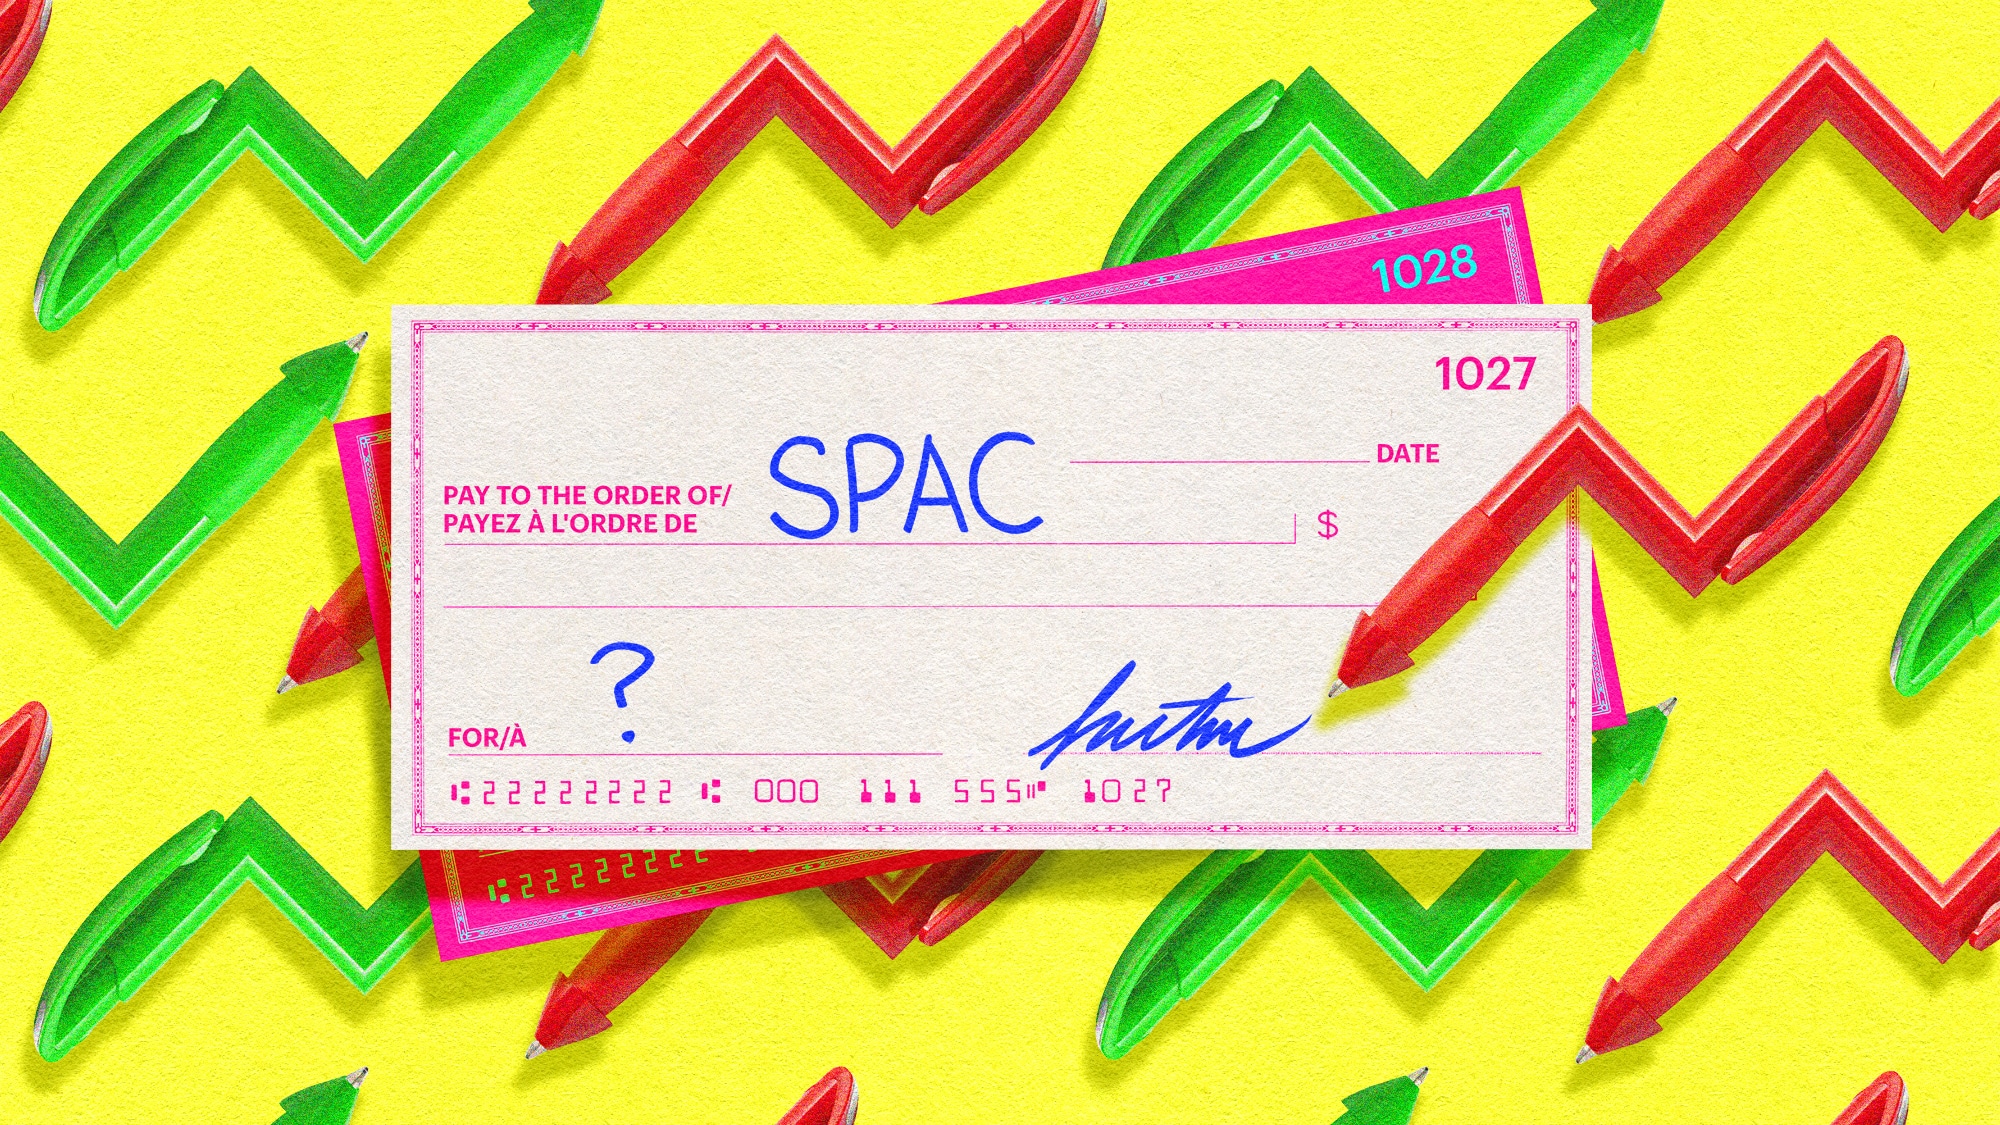 A cheque that says "SPAC" on a yellow background, surrounded by pens that look like stock market chart arrows.